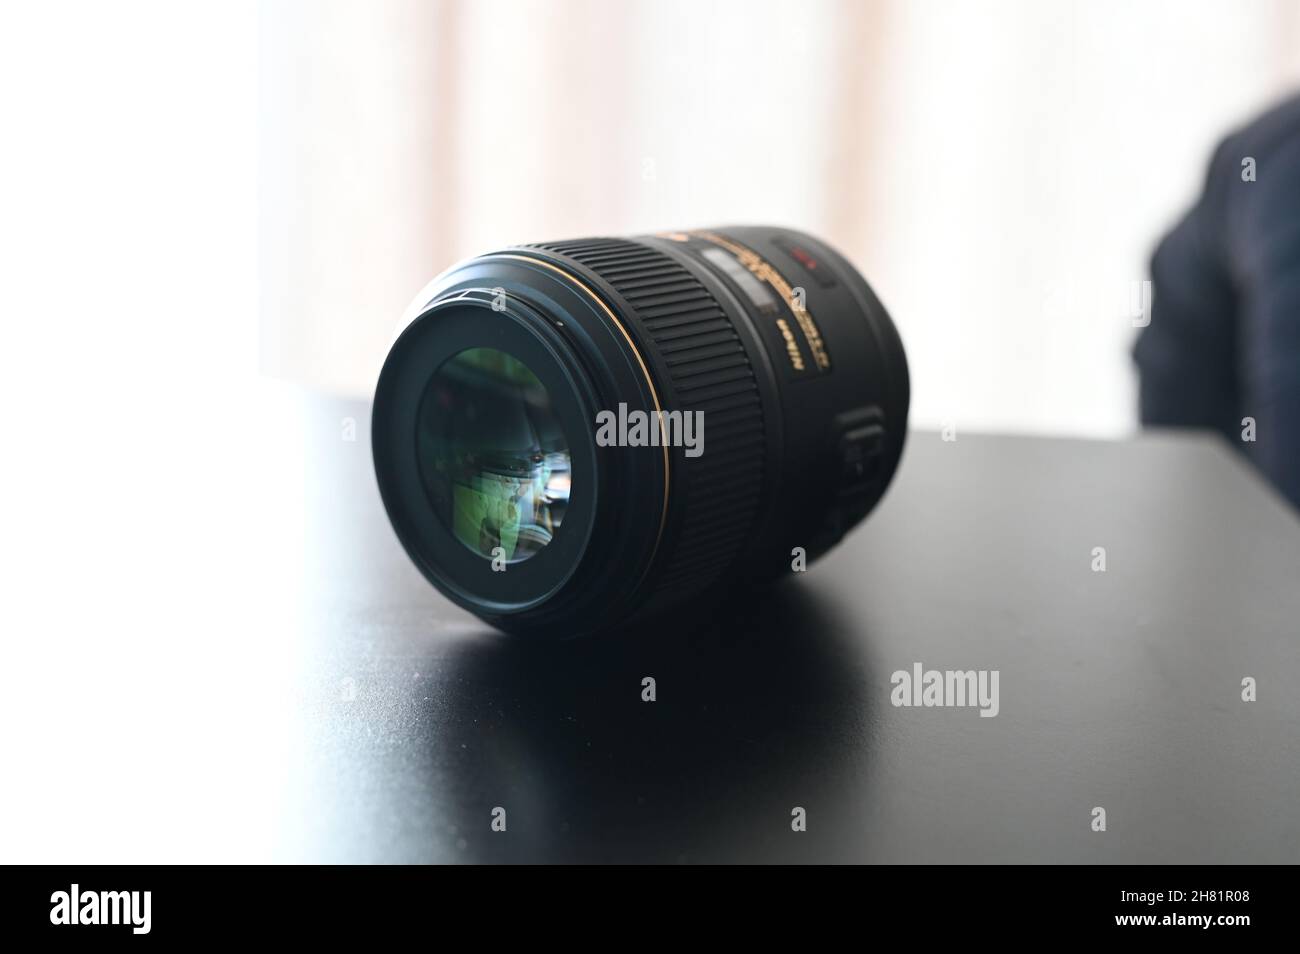 Nikkor Lenses High Resolution Stock Photography and Images - Alamy